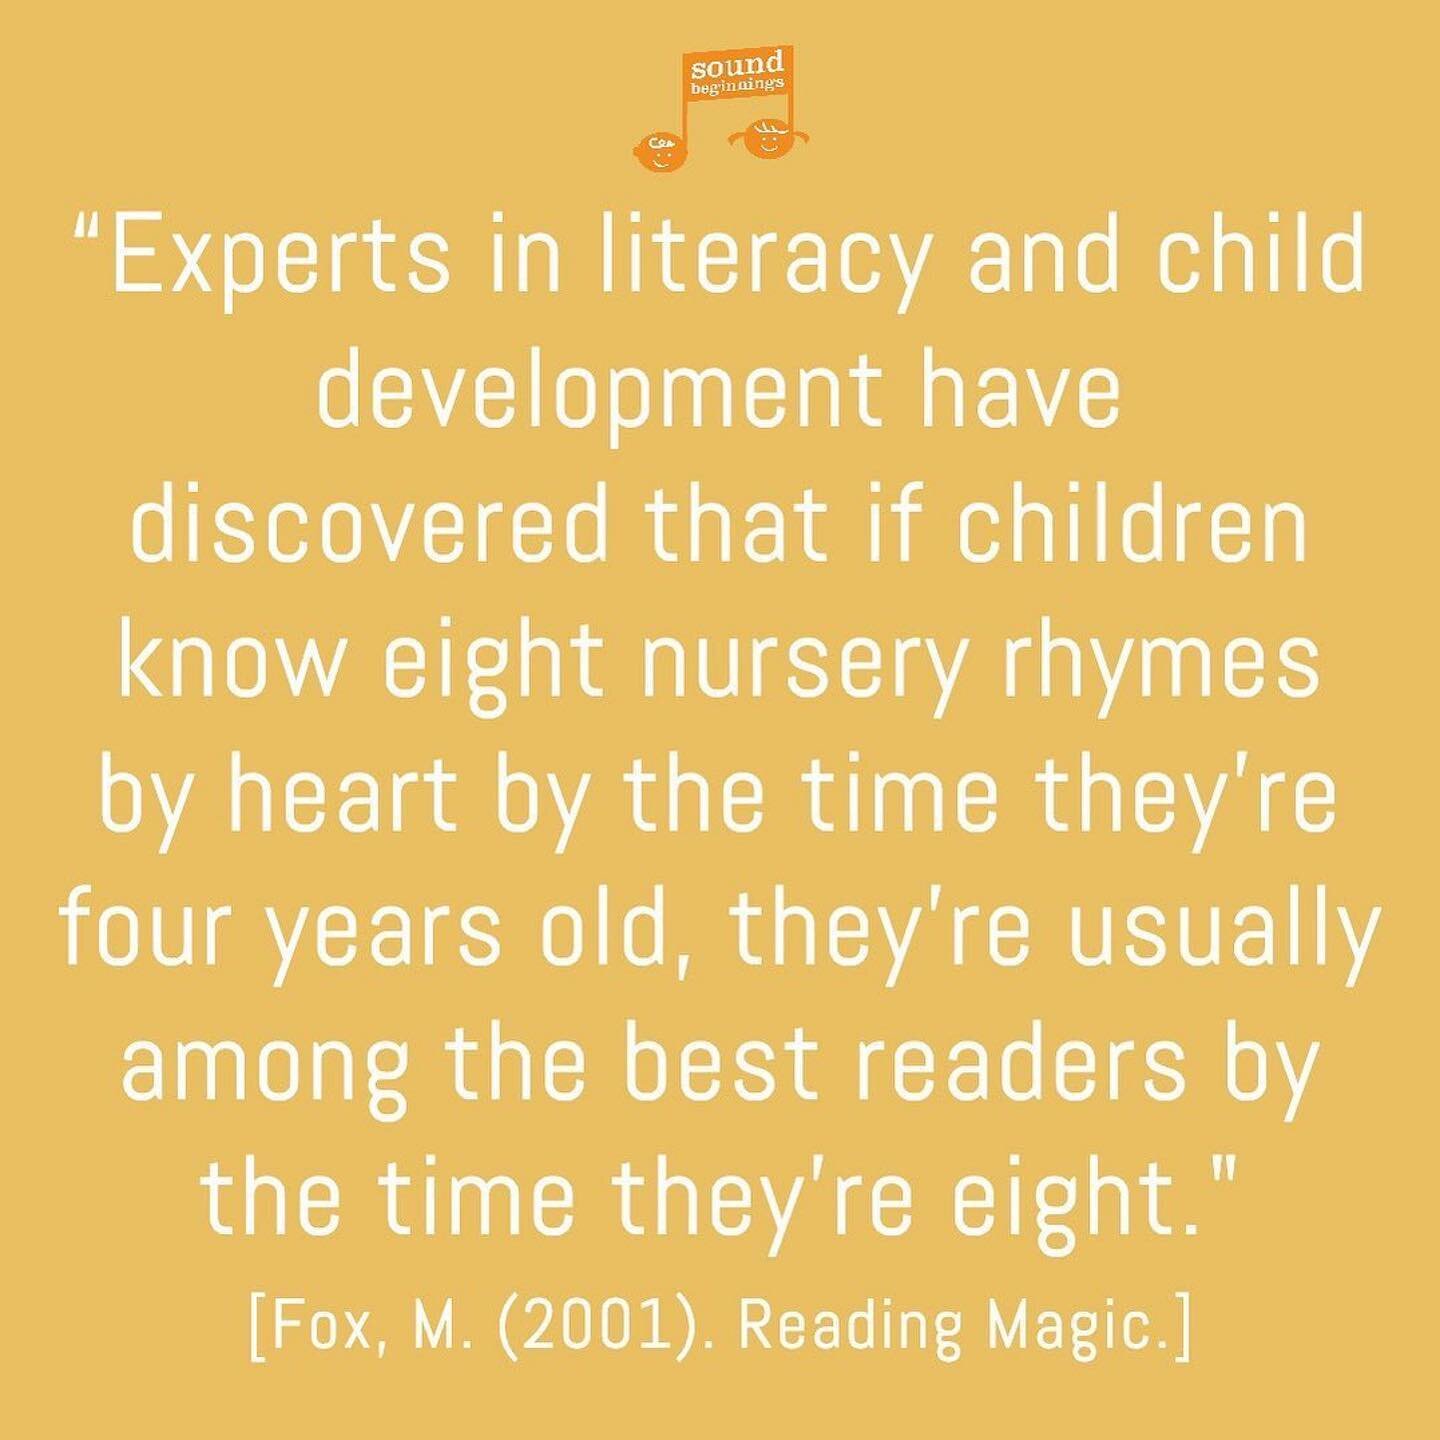 #Repost @miss.shannon.music
・・・
Did you know this?? 🤯 We learn a LOT of nursery rhymes as part of the Sound Beginnings cirriculum - there are so many benefits for little brains! Whether you did one or both semesters this year, your little learners a